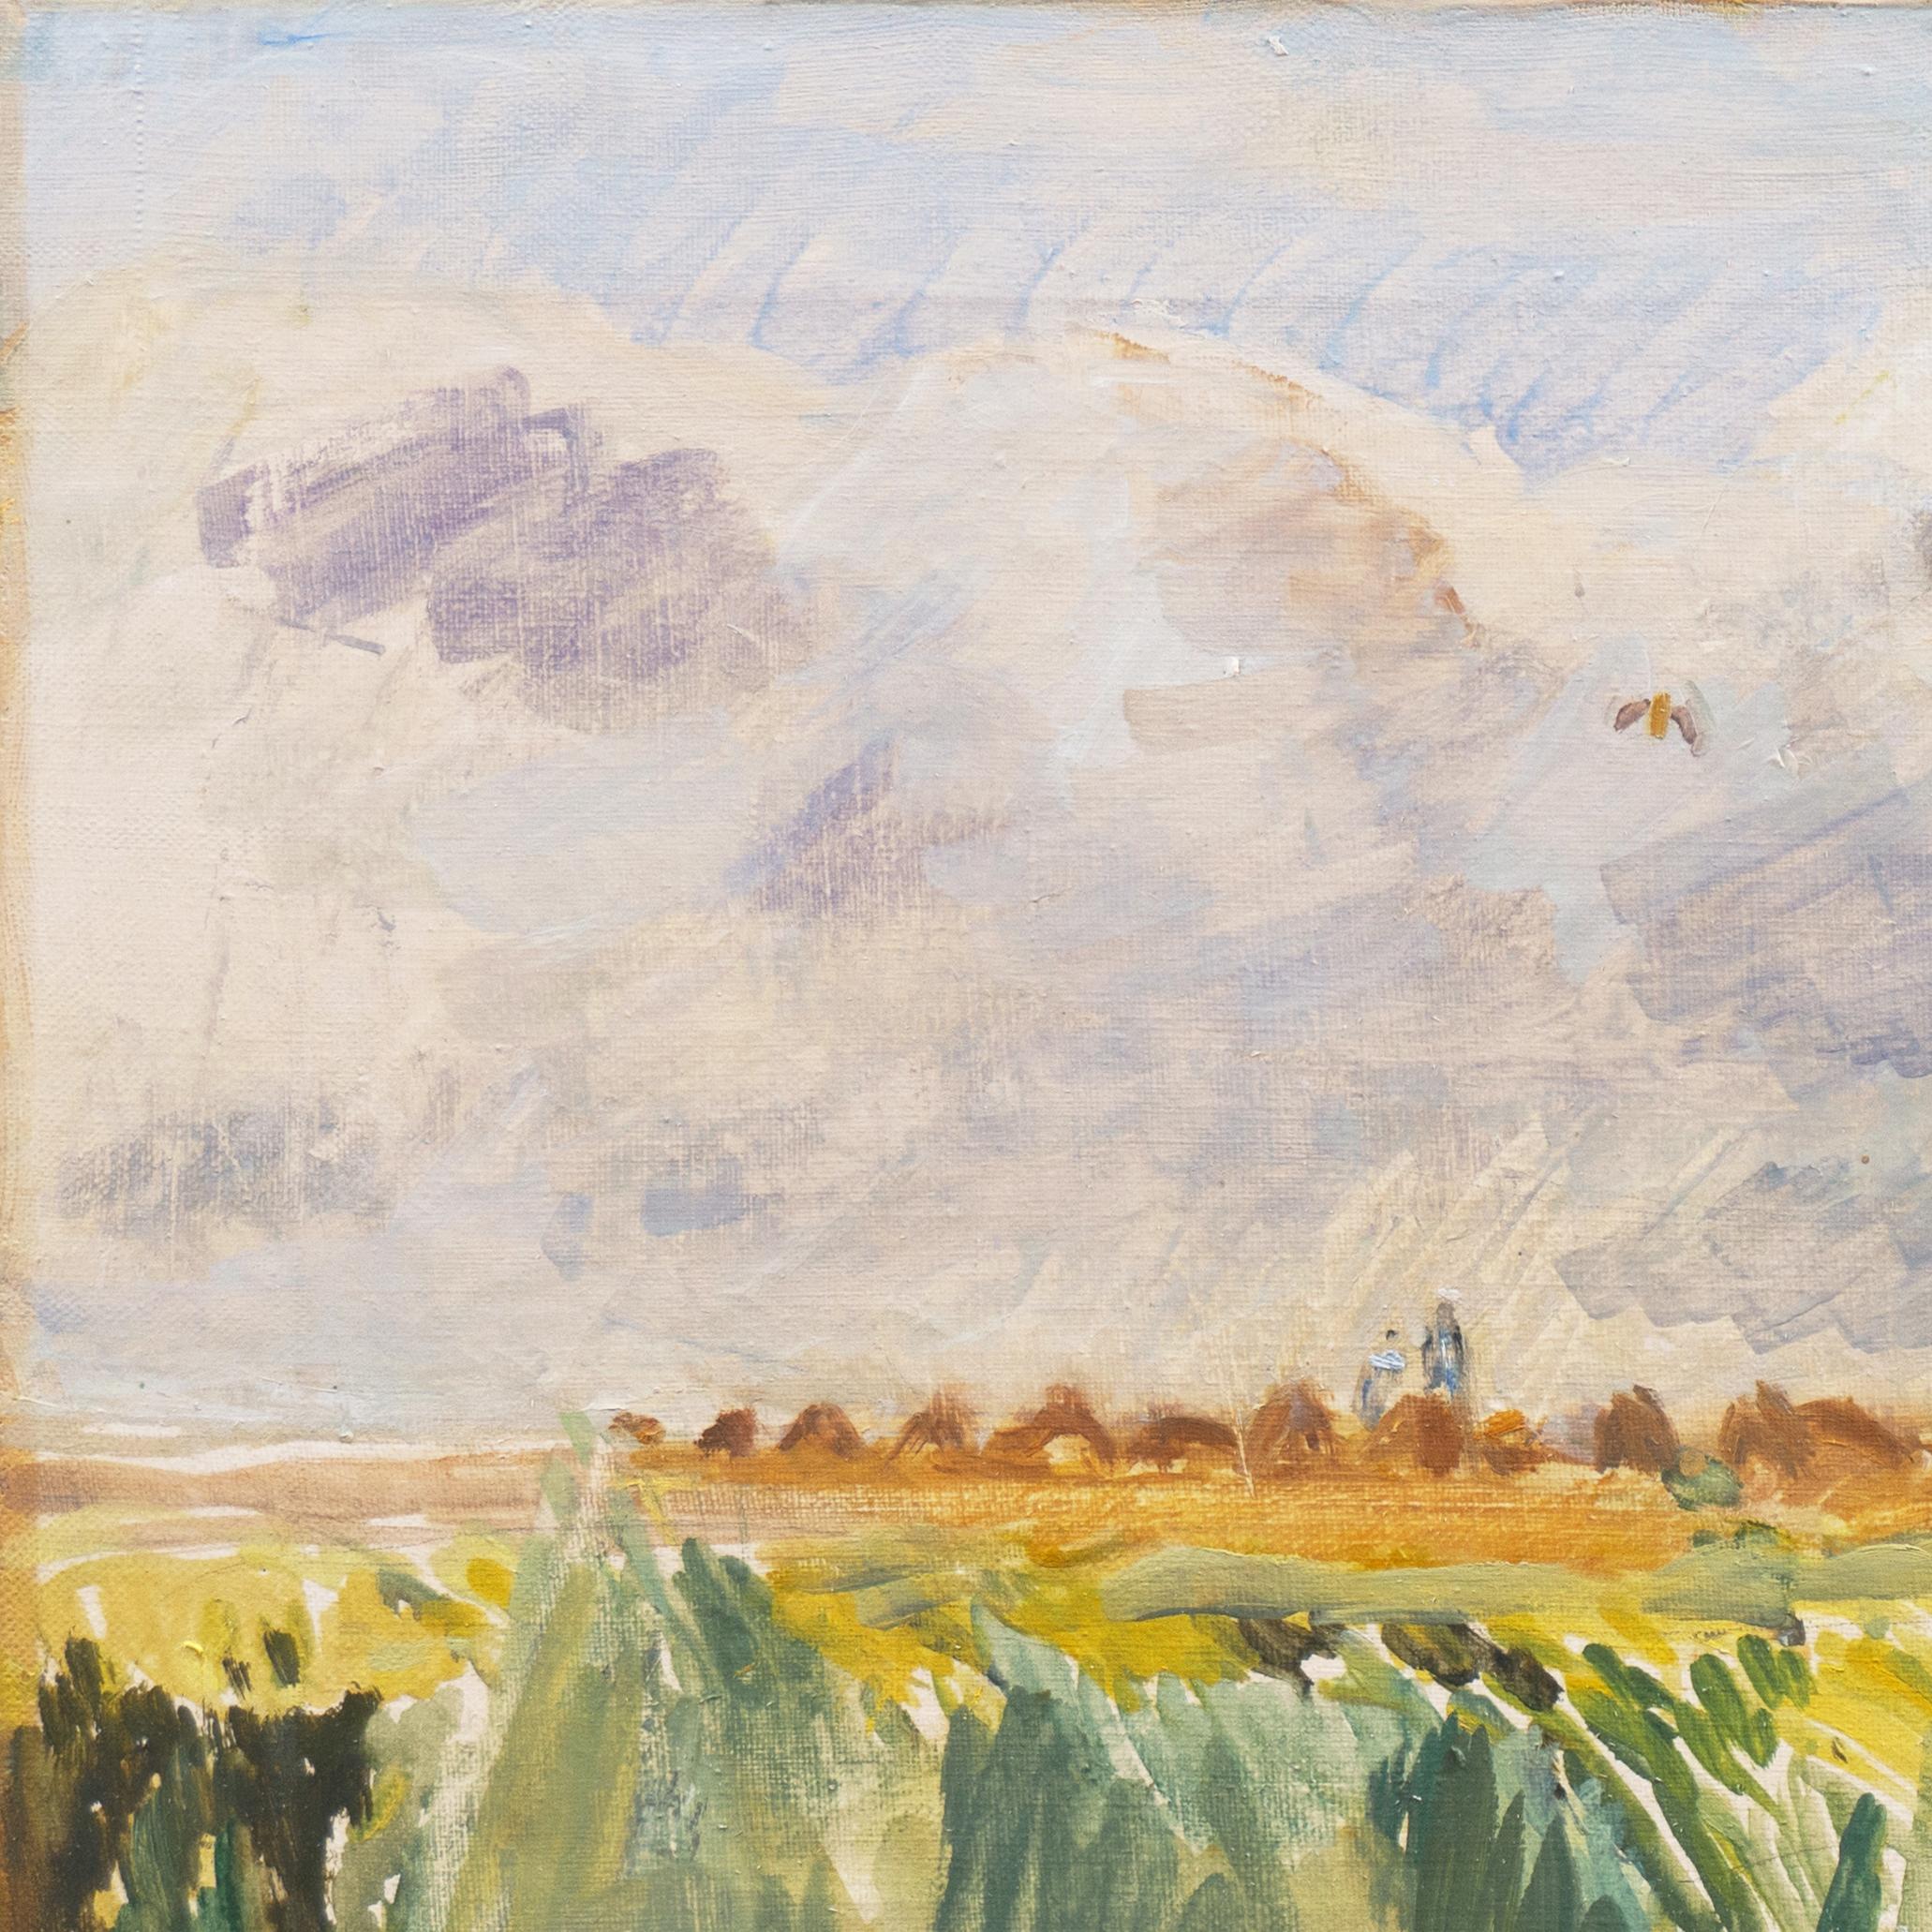 Initialed lower left, 'OK' for Ole Kielberg (Danish, 1911-1985); additionally signed, verso, 'Ole Kielberg', titled and dated 1956.

A painterly, Post-Impressionist oil landscape showing a lyrical view of a sunflower field with haystacks beyond, all